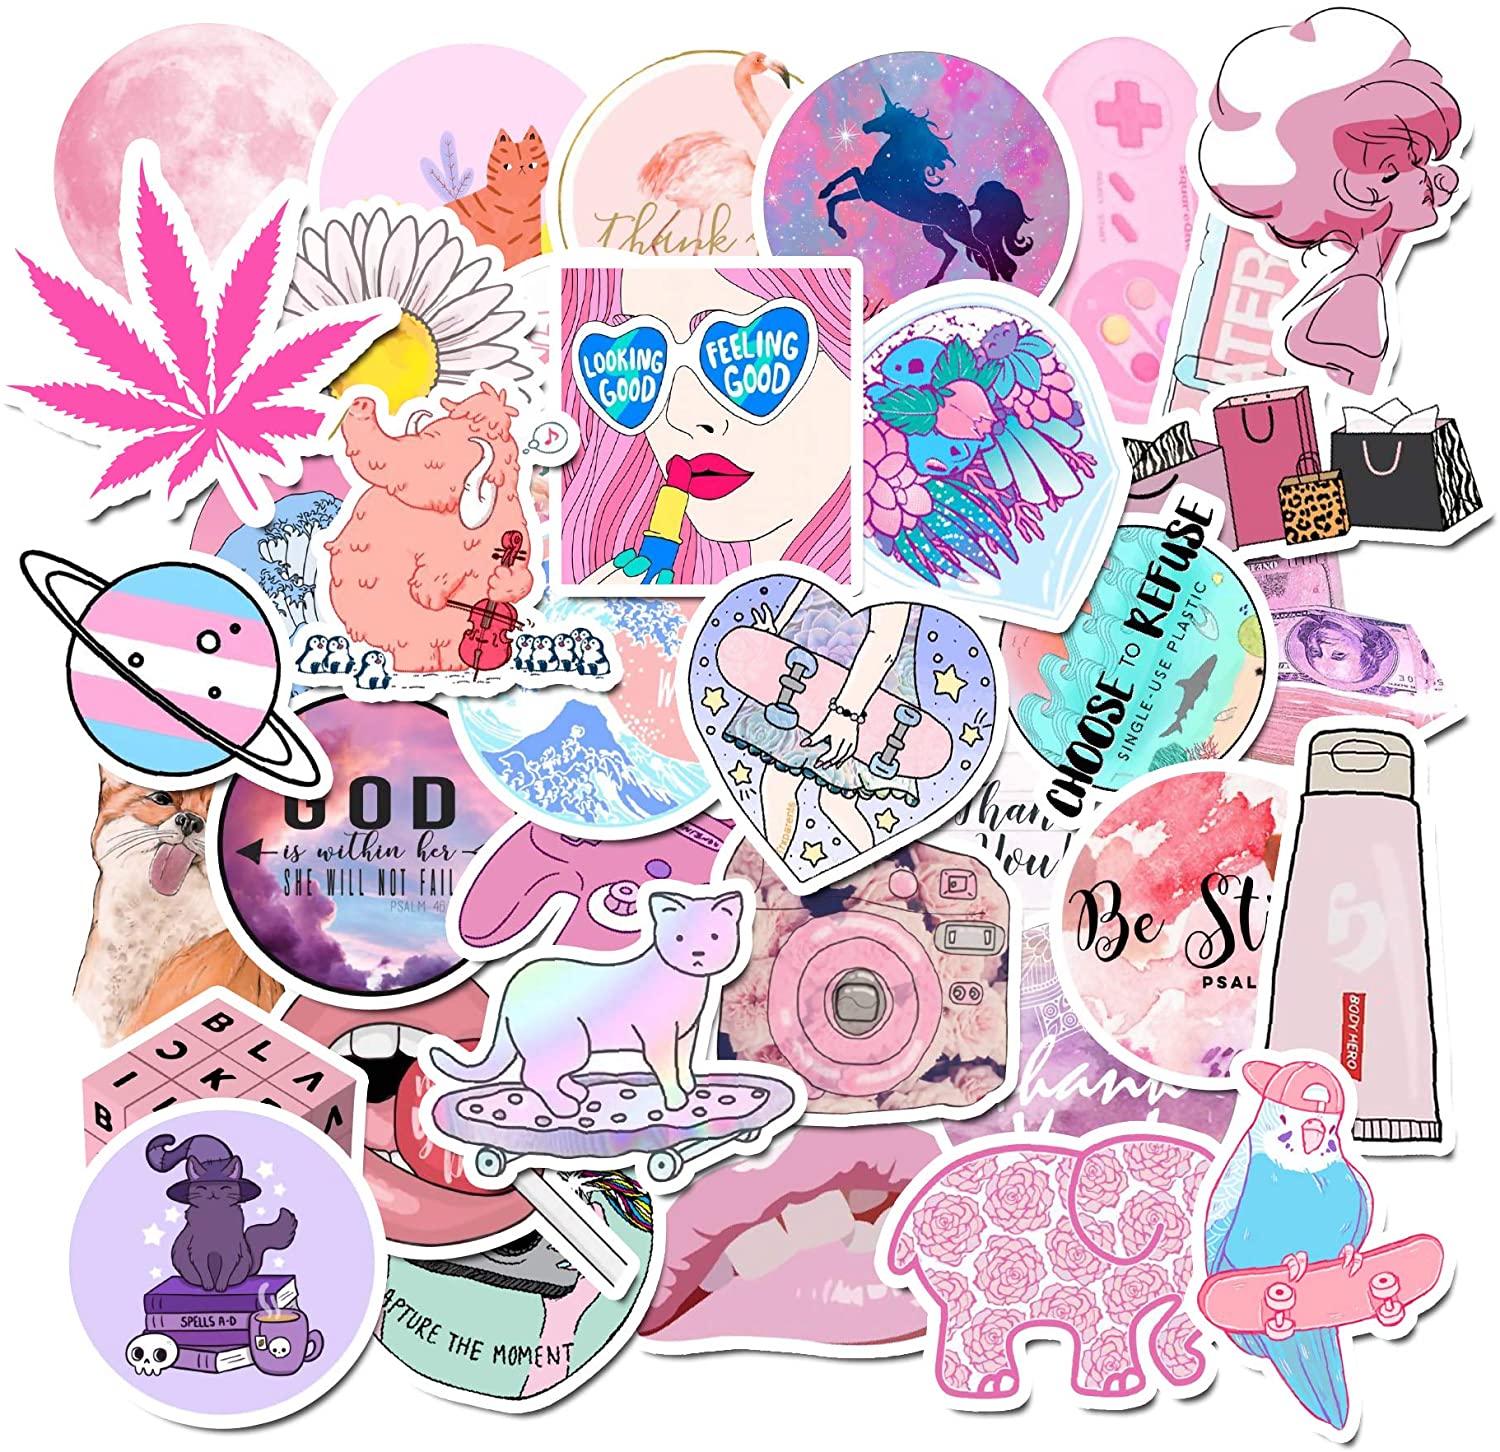 Pink Cute Stickers 50Pcs, Vsco Stickers for Laptop and Water Bottle Decal Aesthetic Trendy Sticker Pack for Teens, Girls, Women Vinyl Stickers